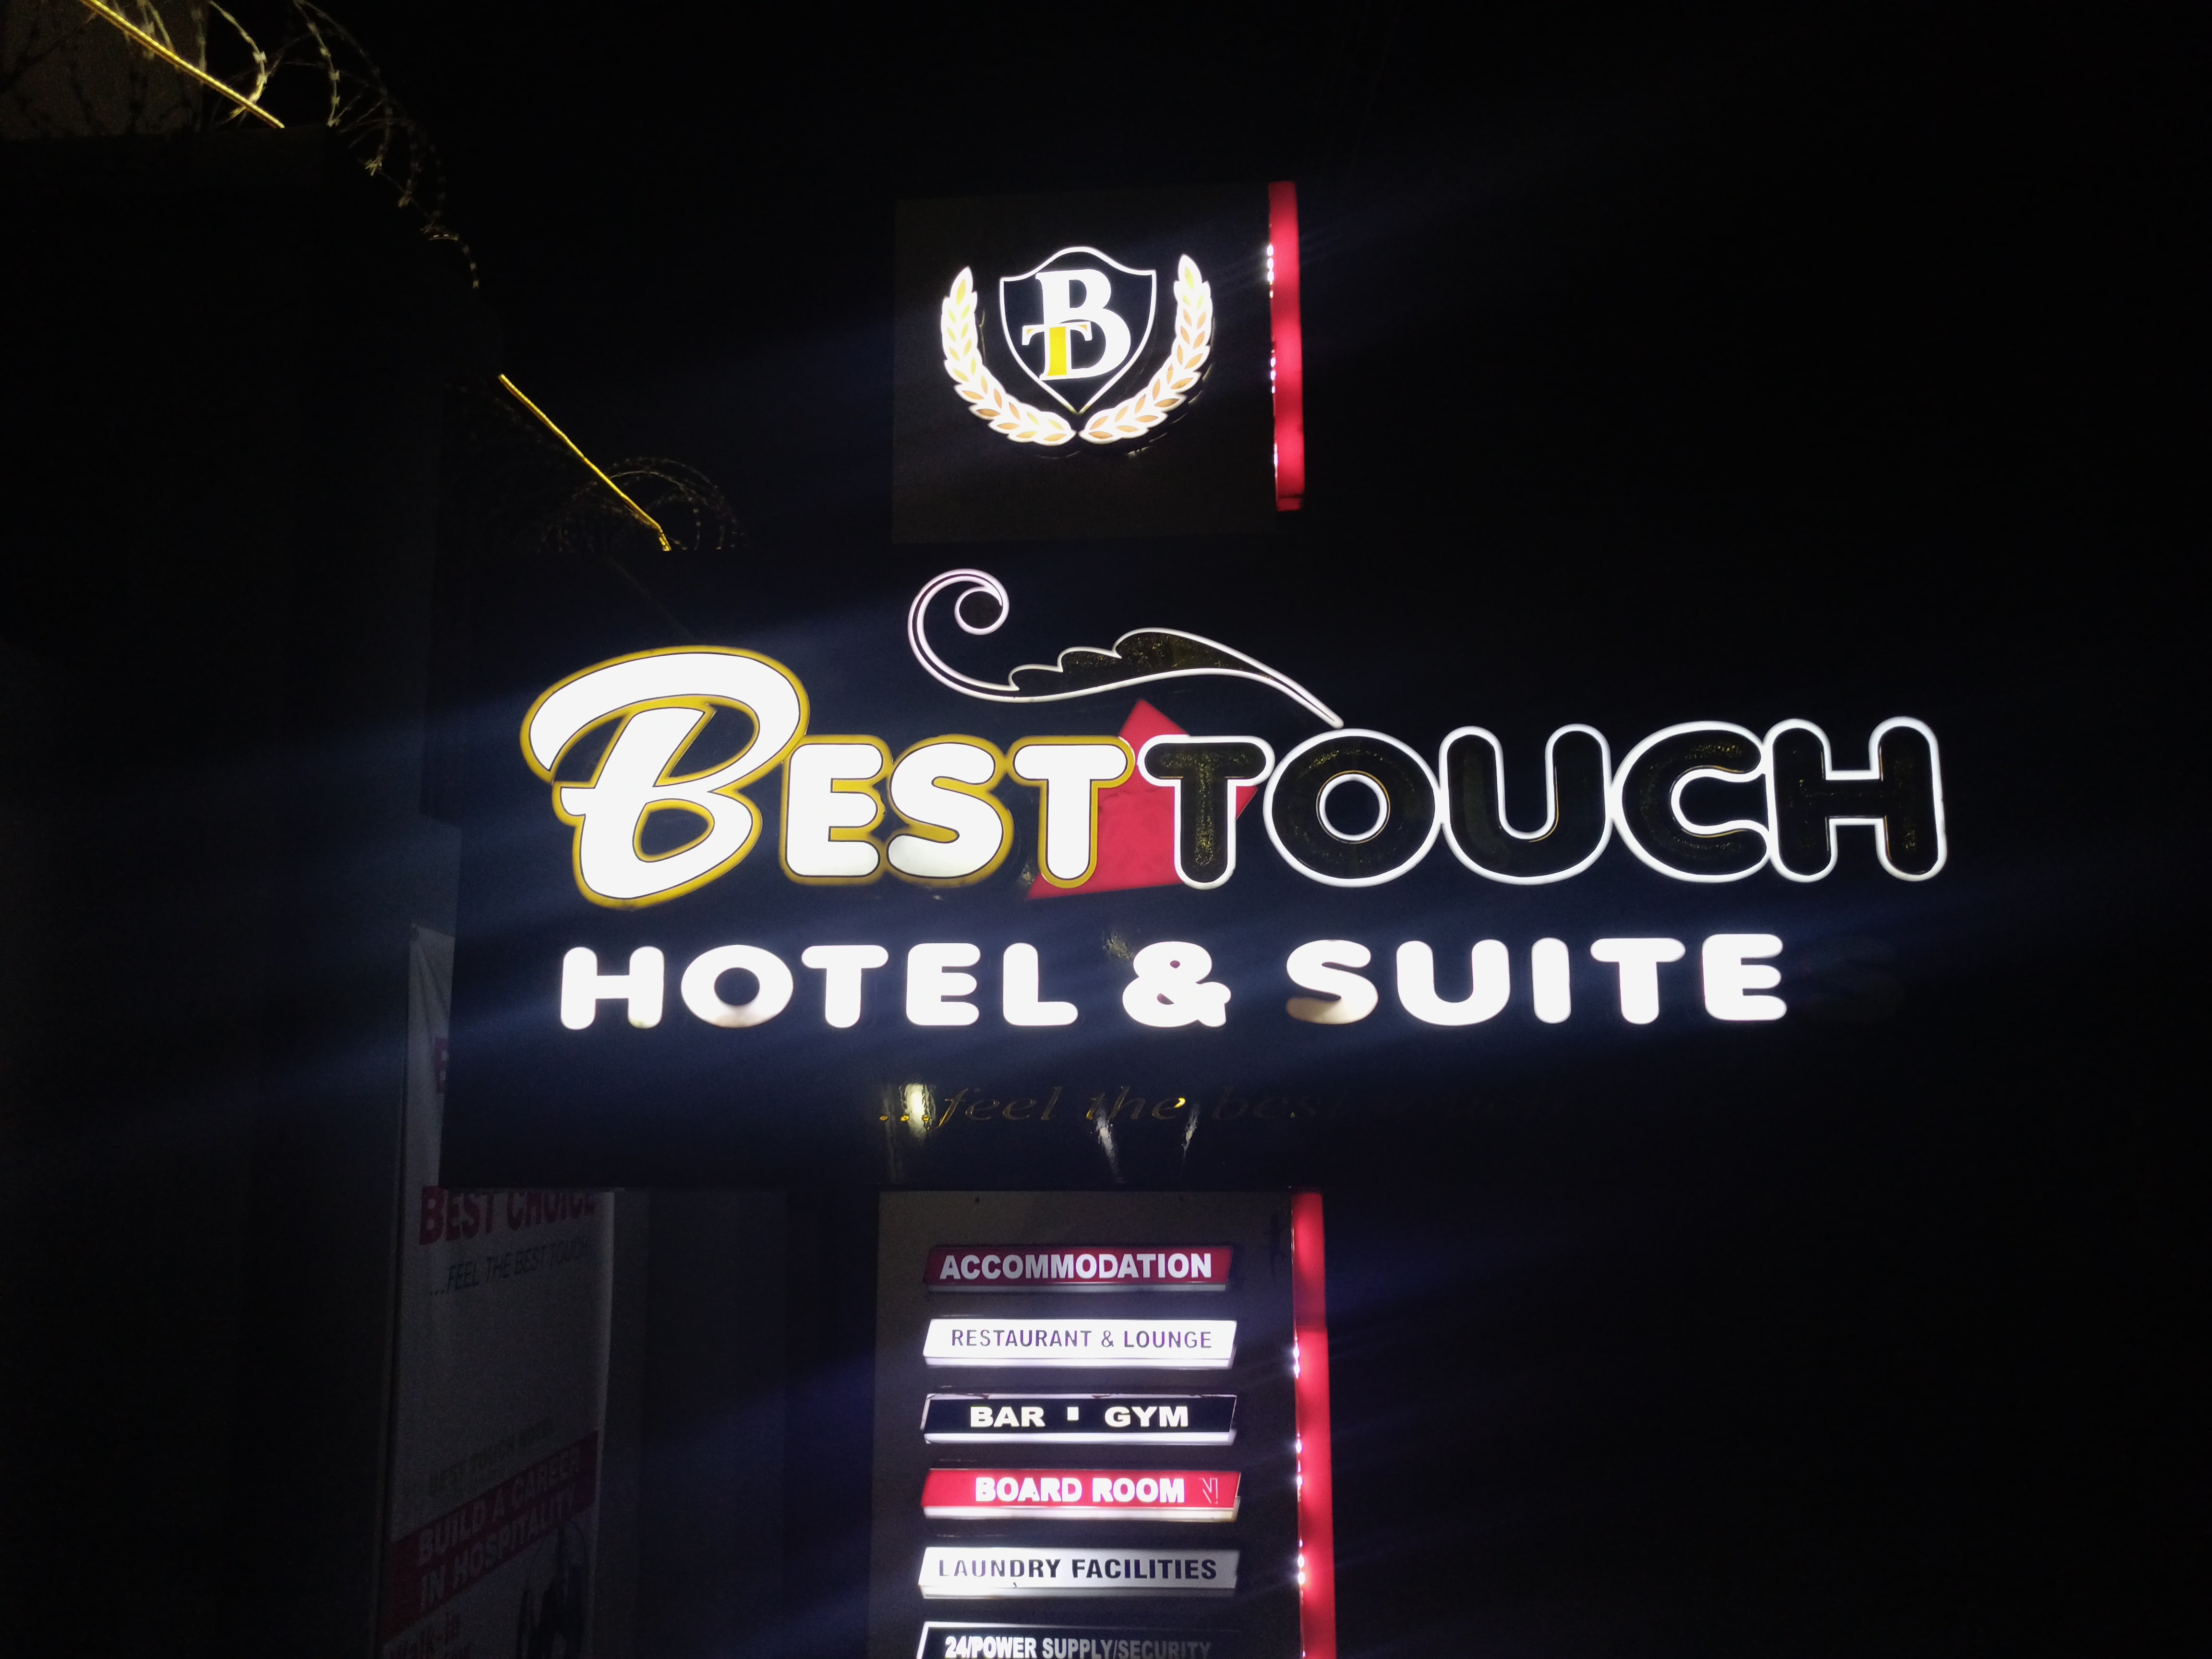 Best Touch Hotel & Suites